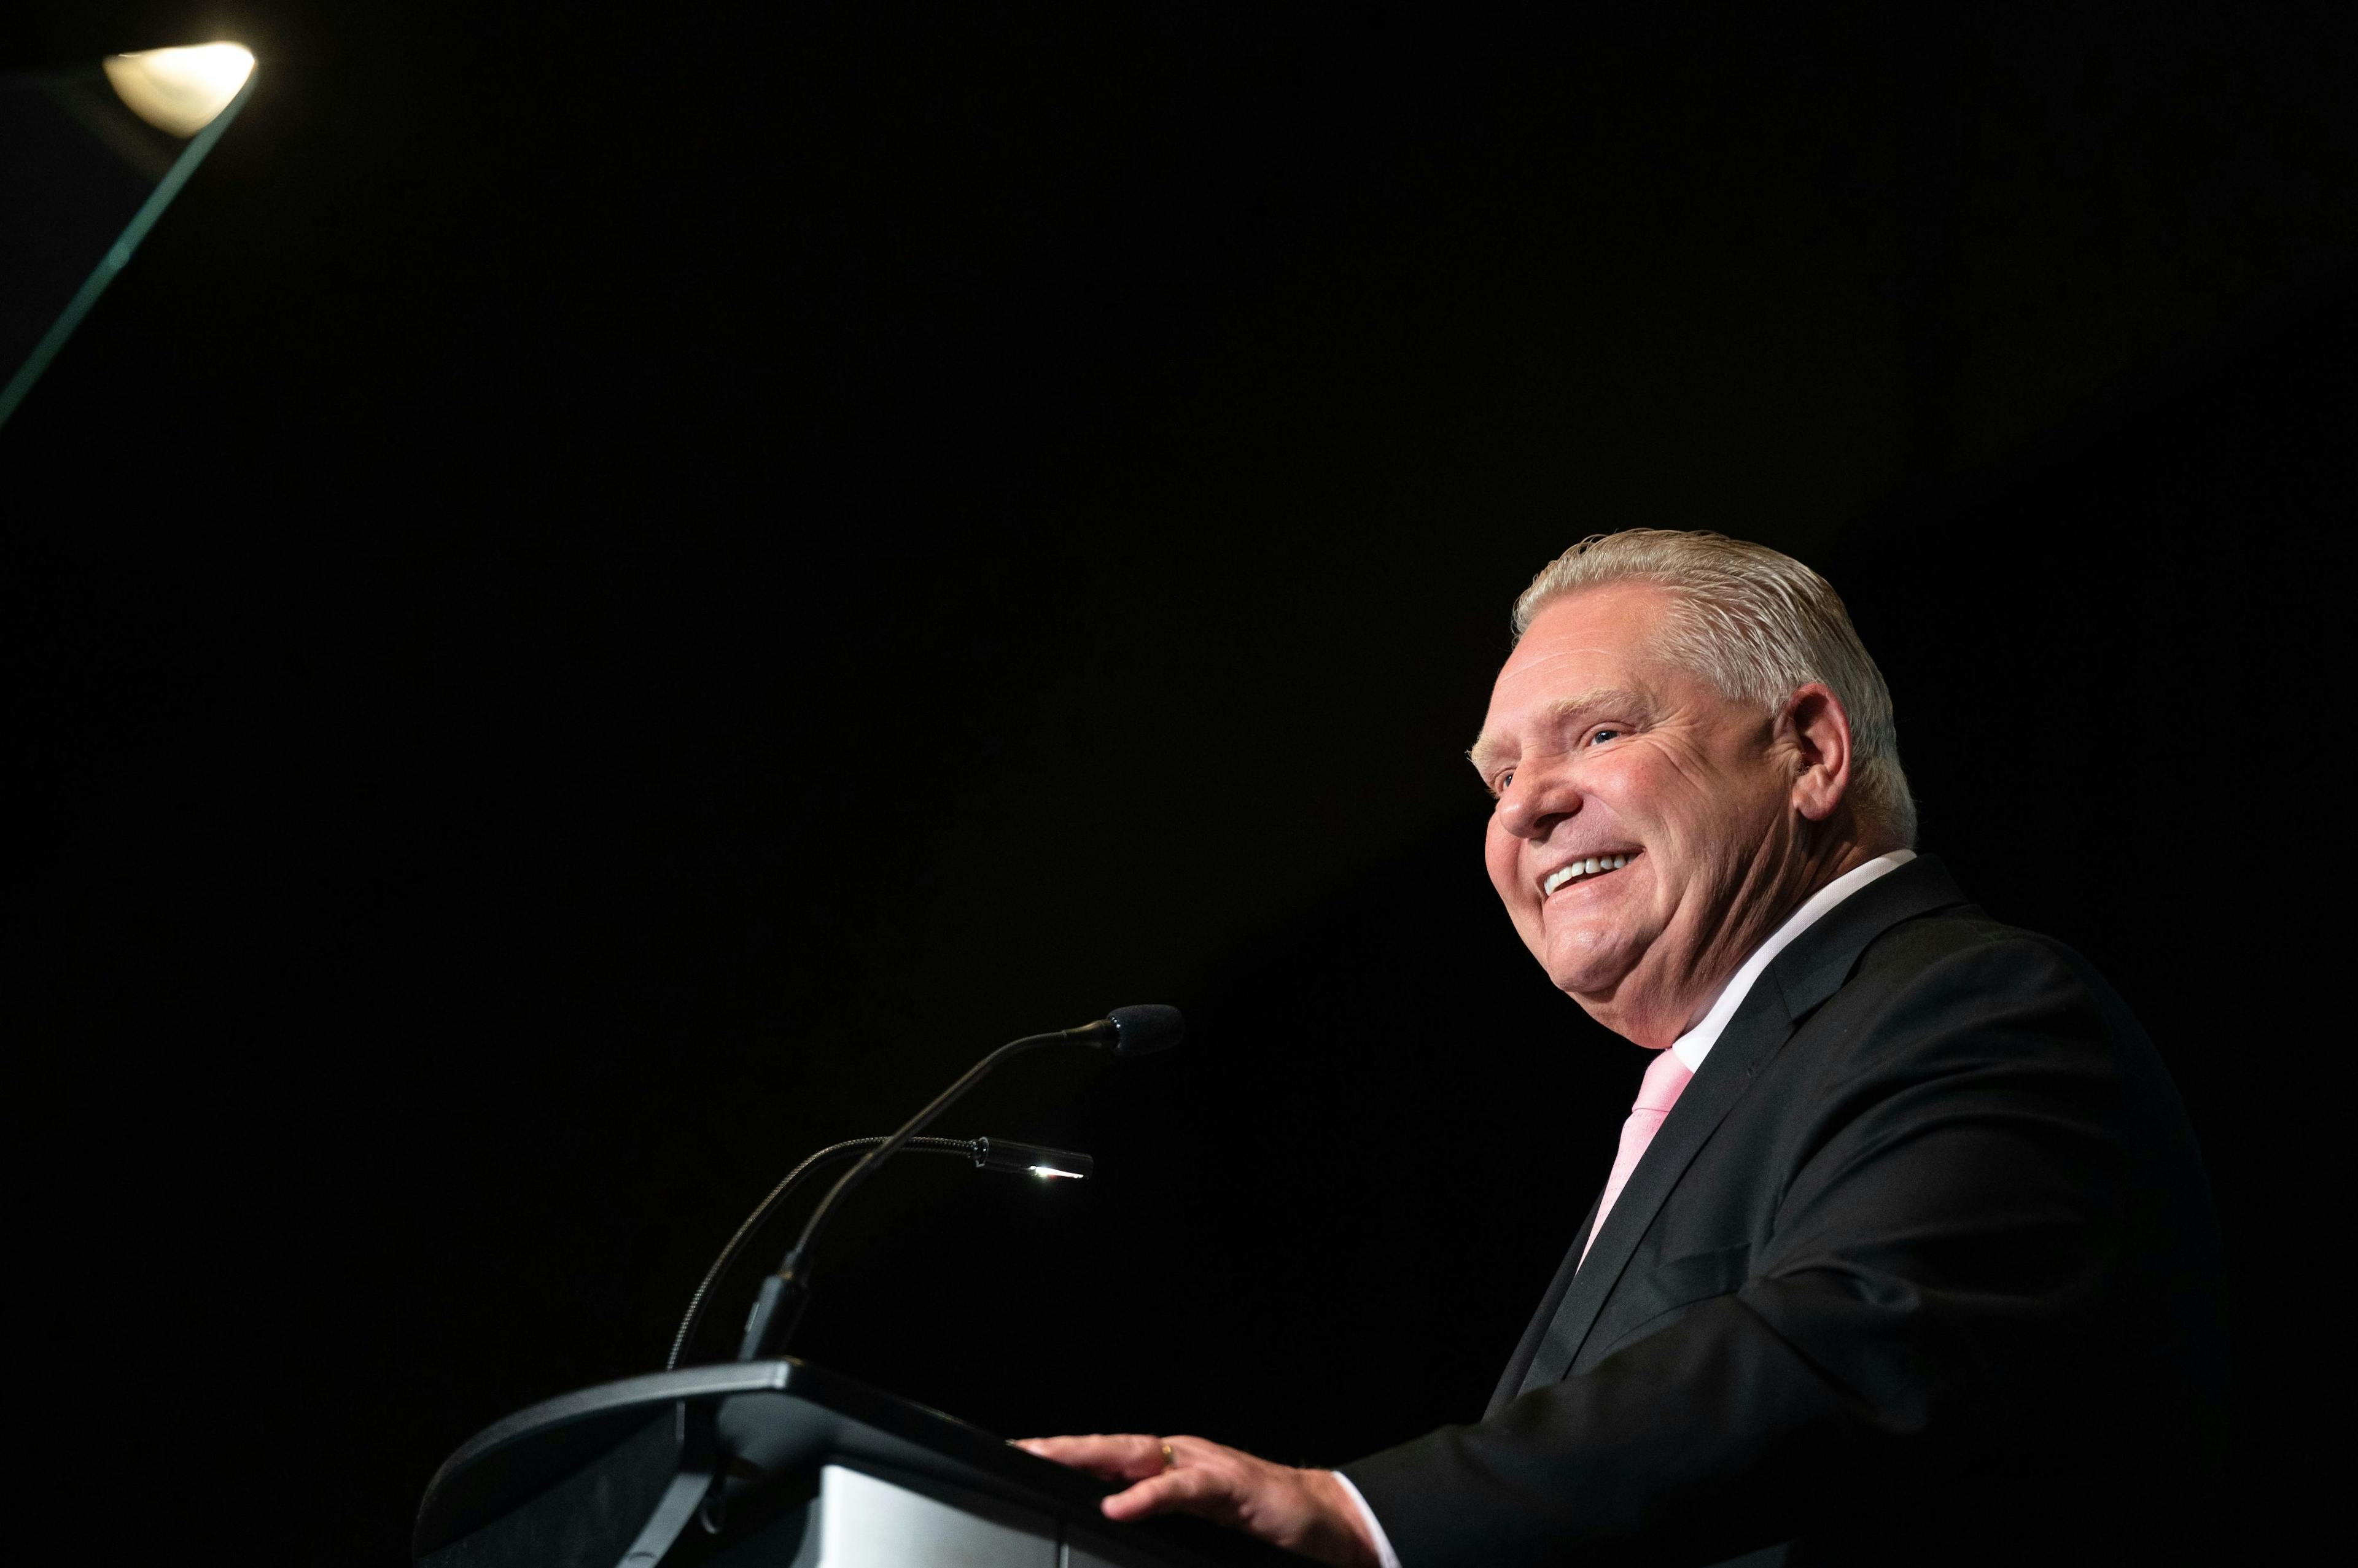 Ford government's mining bill passes despite criticism from some First Nations, NDP